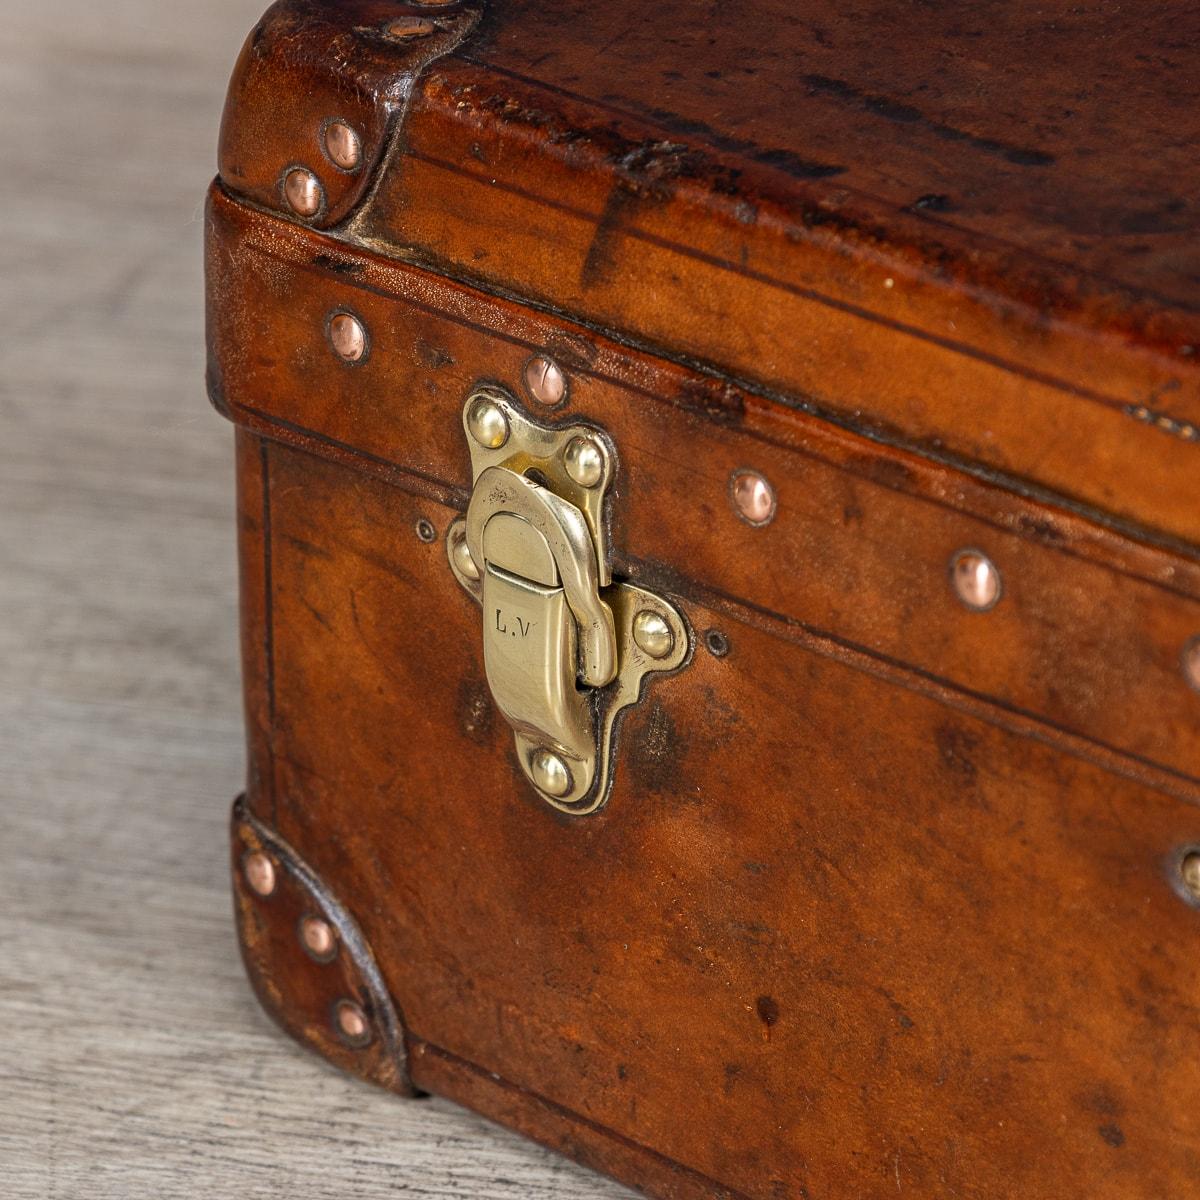 20th Century Louis Vuitton Suitcase In Natural Cow Hide, France c.1910 For Sale 13